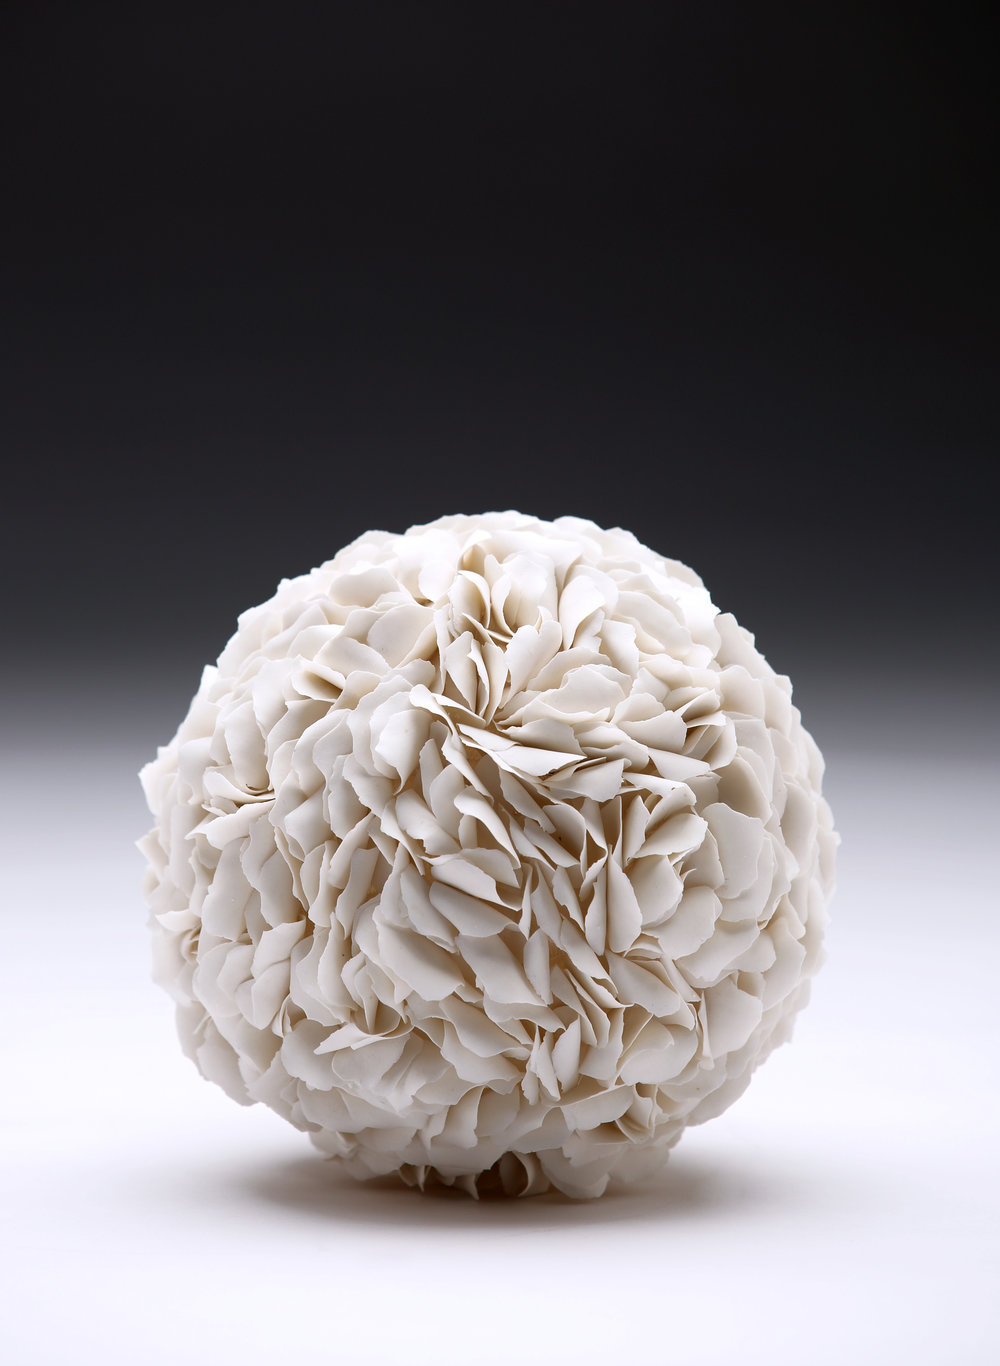 Delicate Bloom And Petal Based Ceramic Sculptures By Jennifer Hickey 11